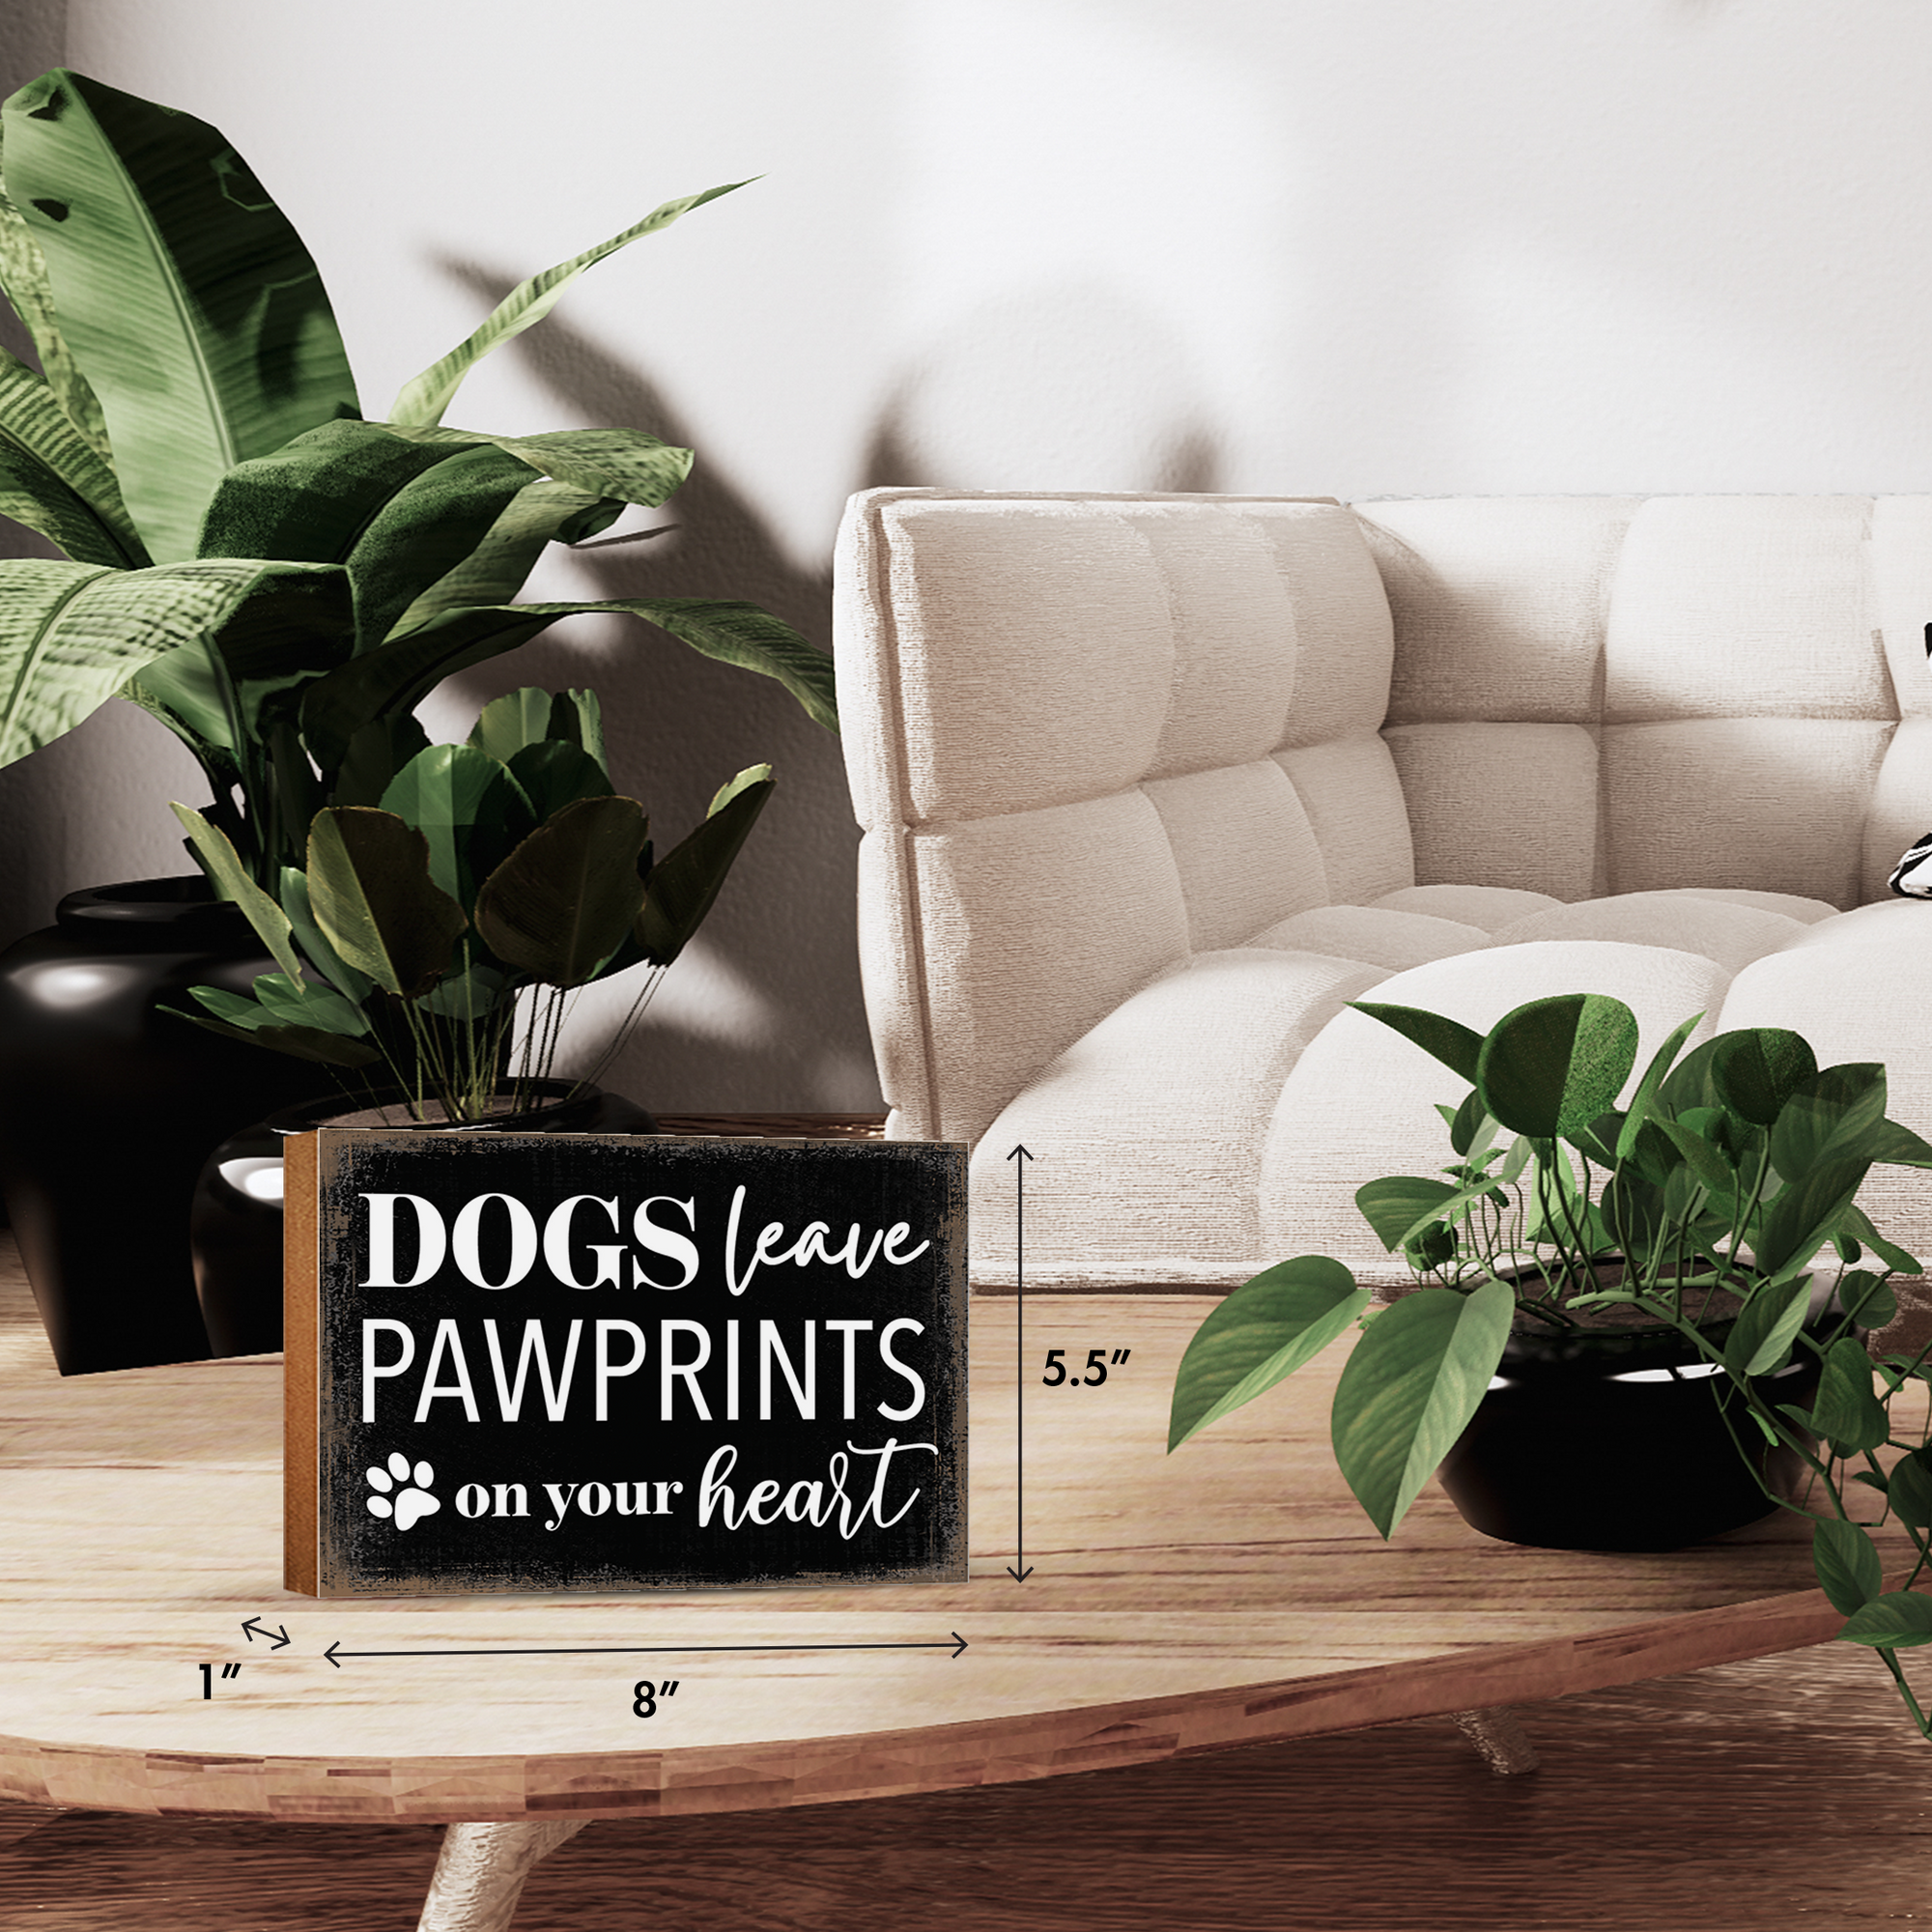 Wooden Shelf Decor and Tabletop Signs with Pet Verses - Pawprints